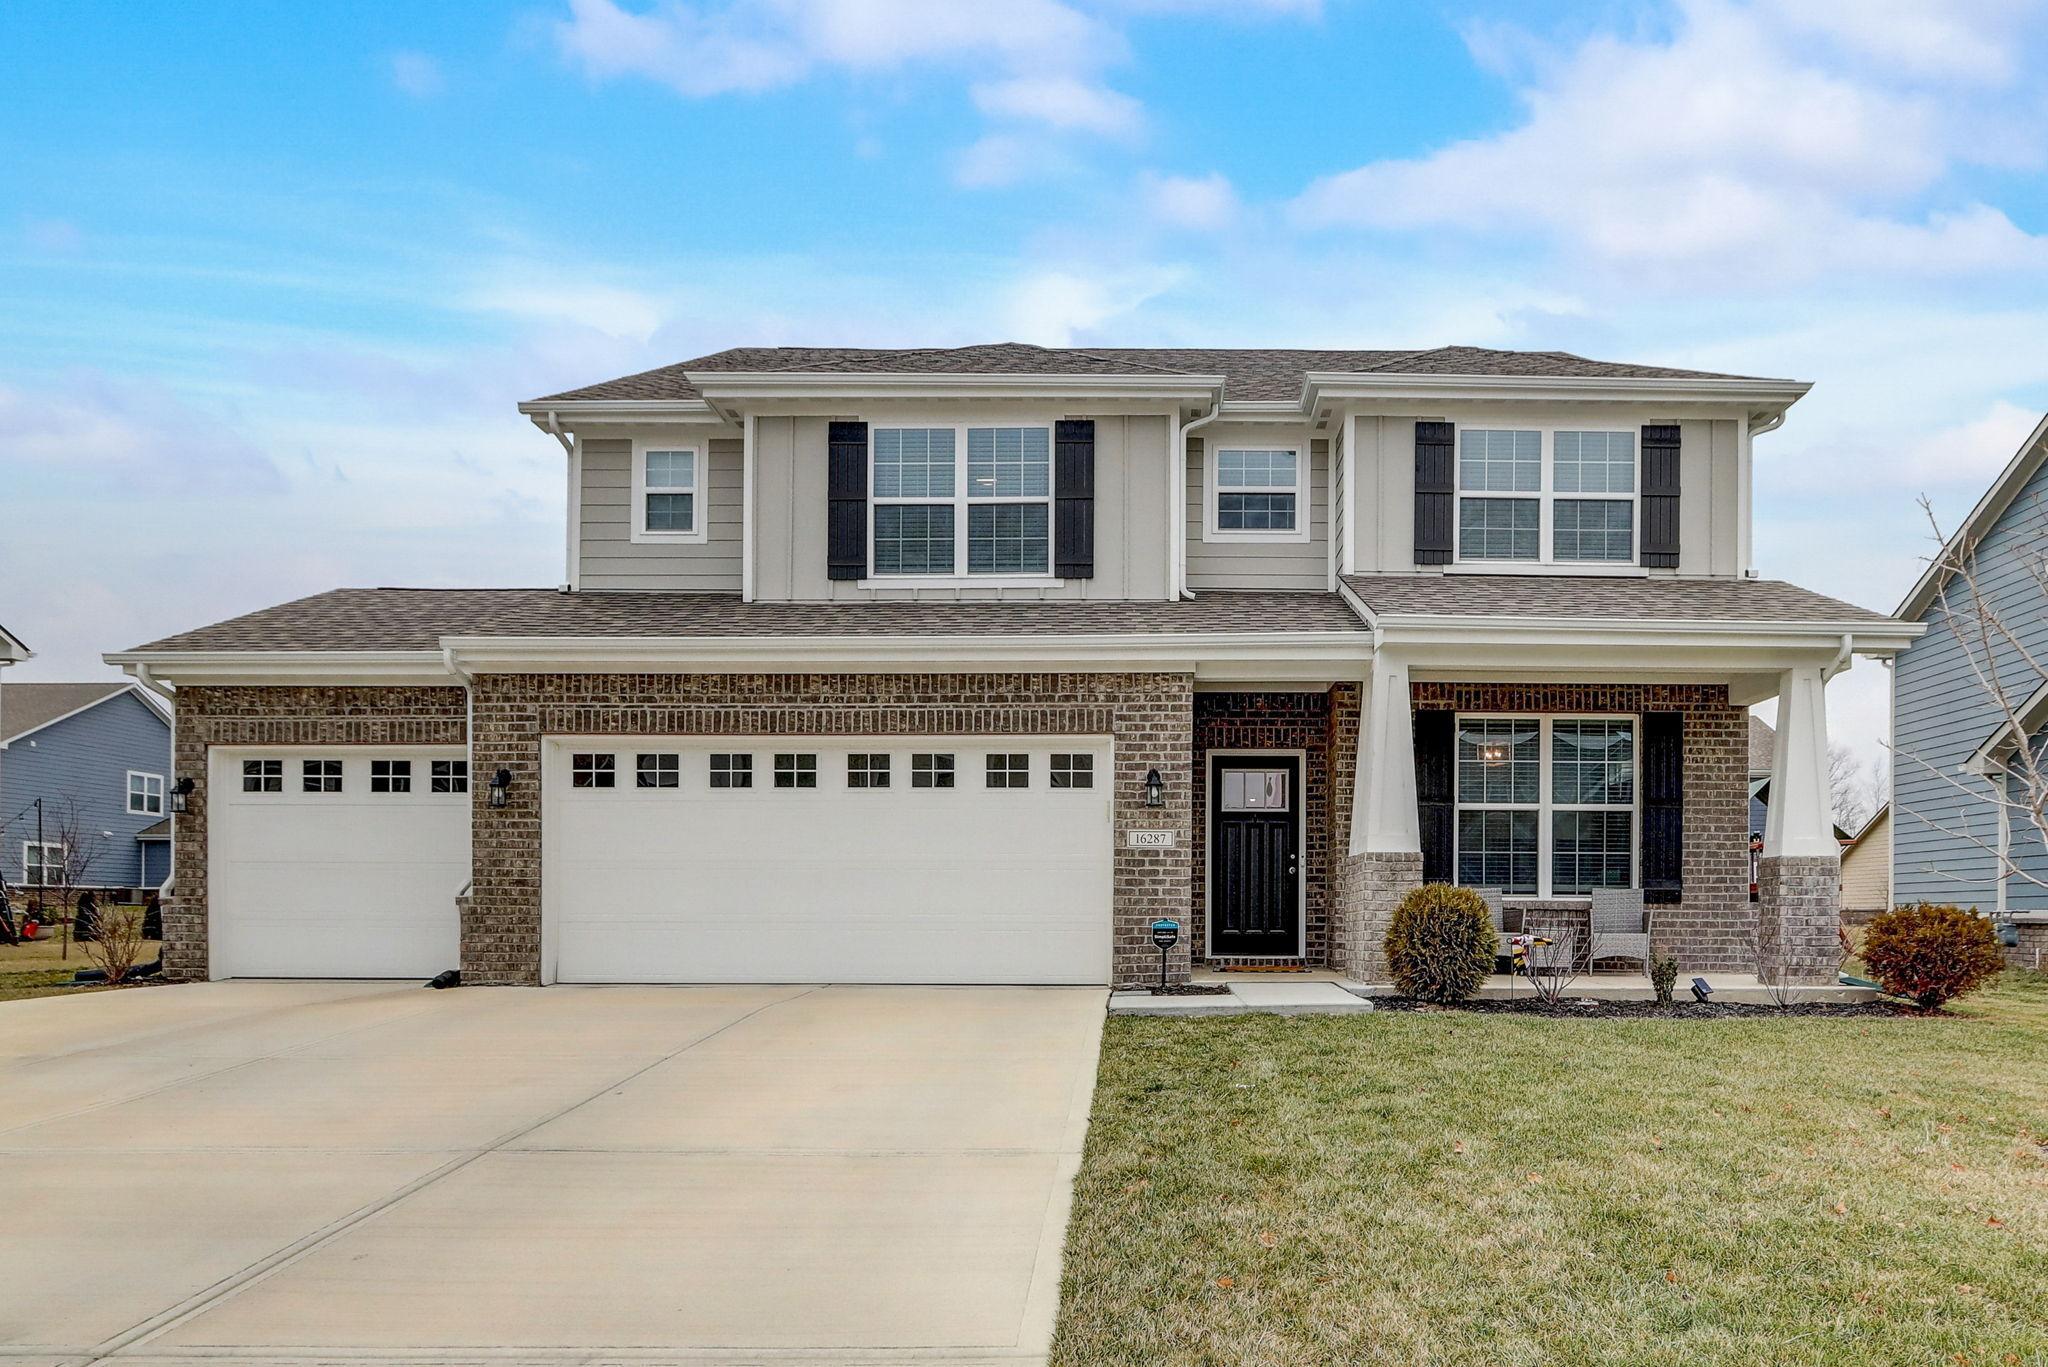 Photo one of 16287 Taconite Dr Noblesville IN 46060 | MLS 21963479